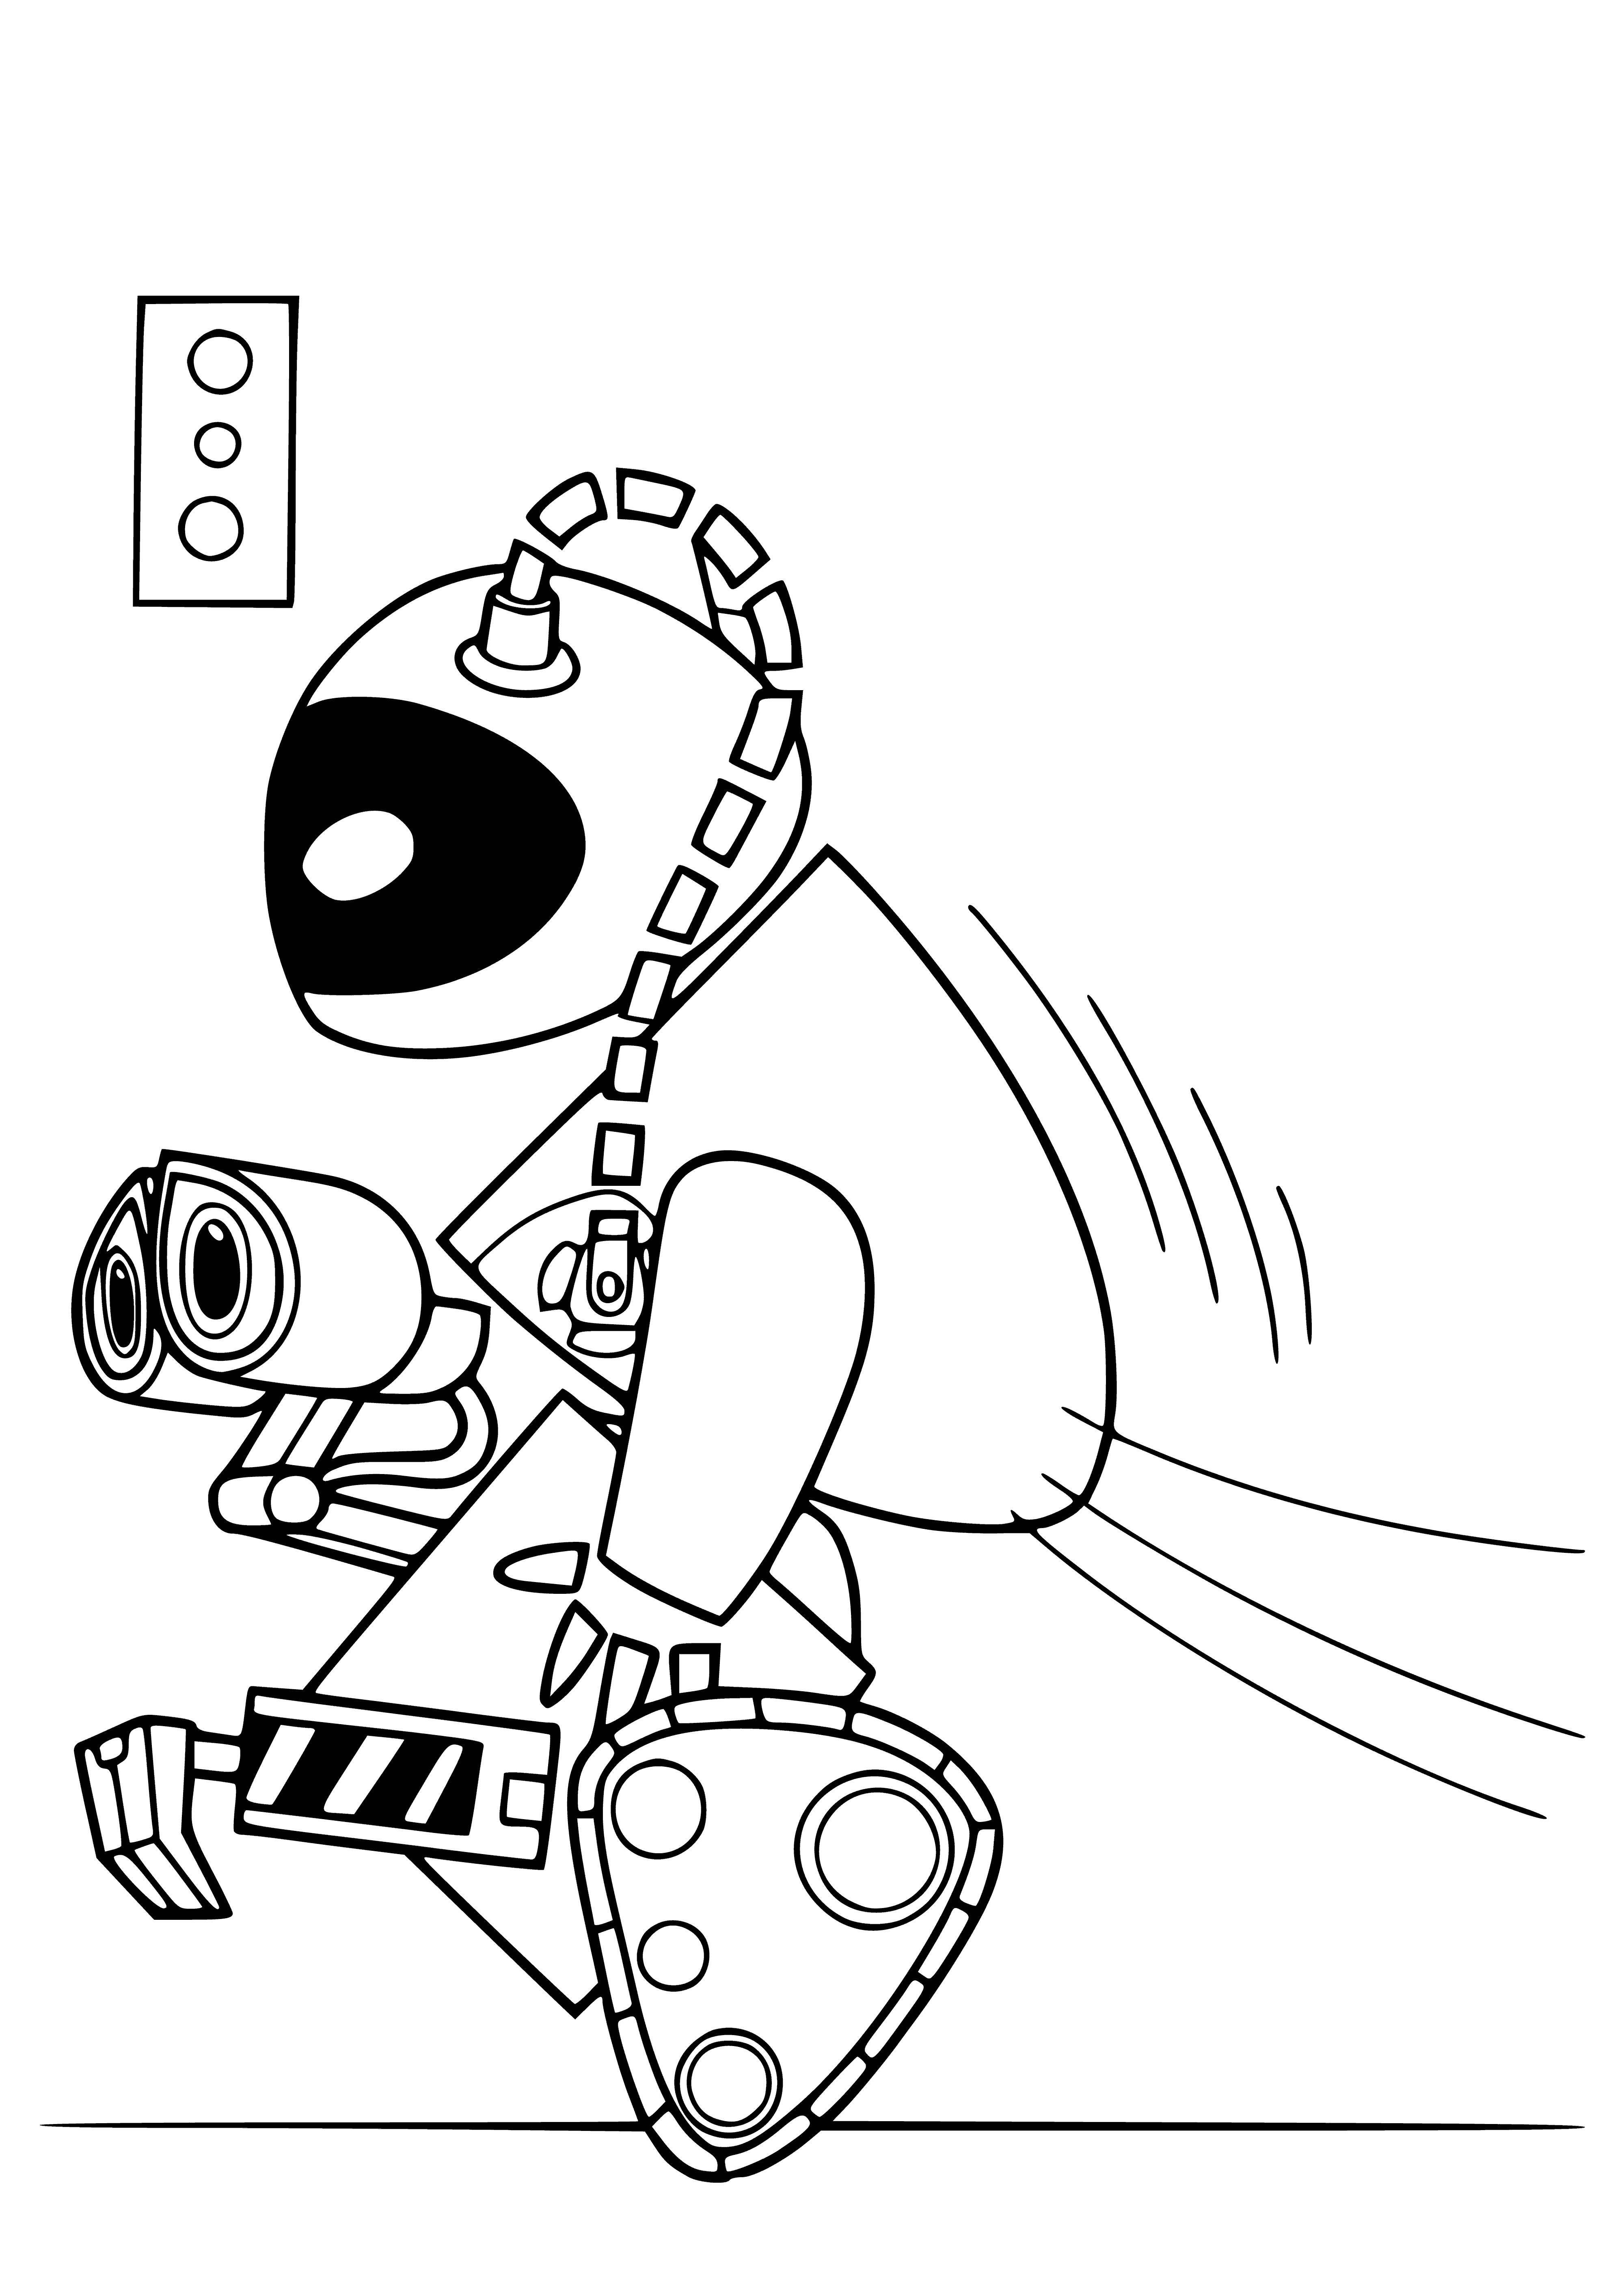 coloring page: Wall-E drives in his little spaceship thru a valley with mountains. Eve flies towards him with a silver object, against a beautiful deep blue sky. #WallE #Eve #coloringpage